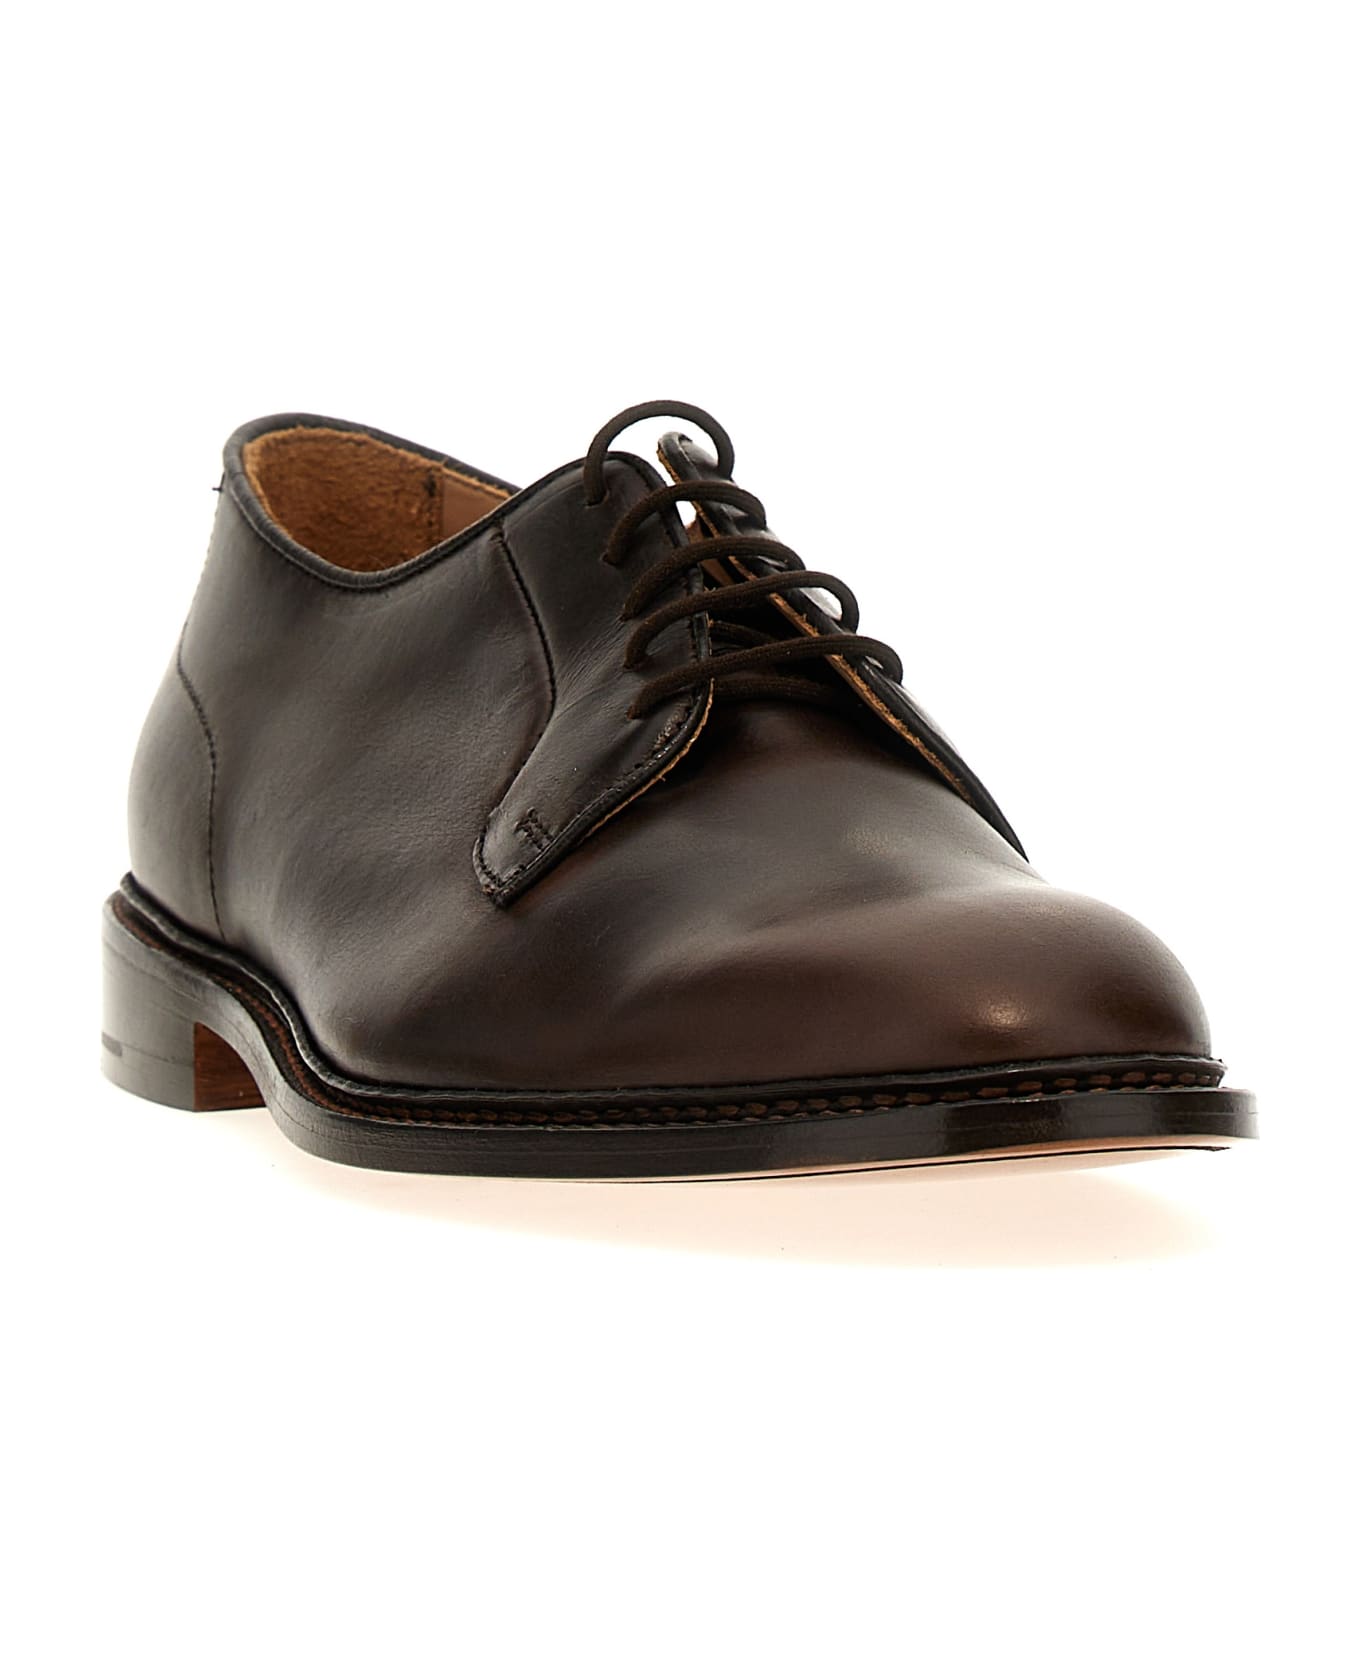 Tricker's 'robert' Lace Up Shoes - Brown ローファー＆デッキシューズ